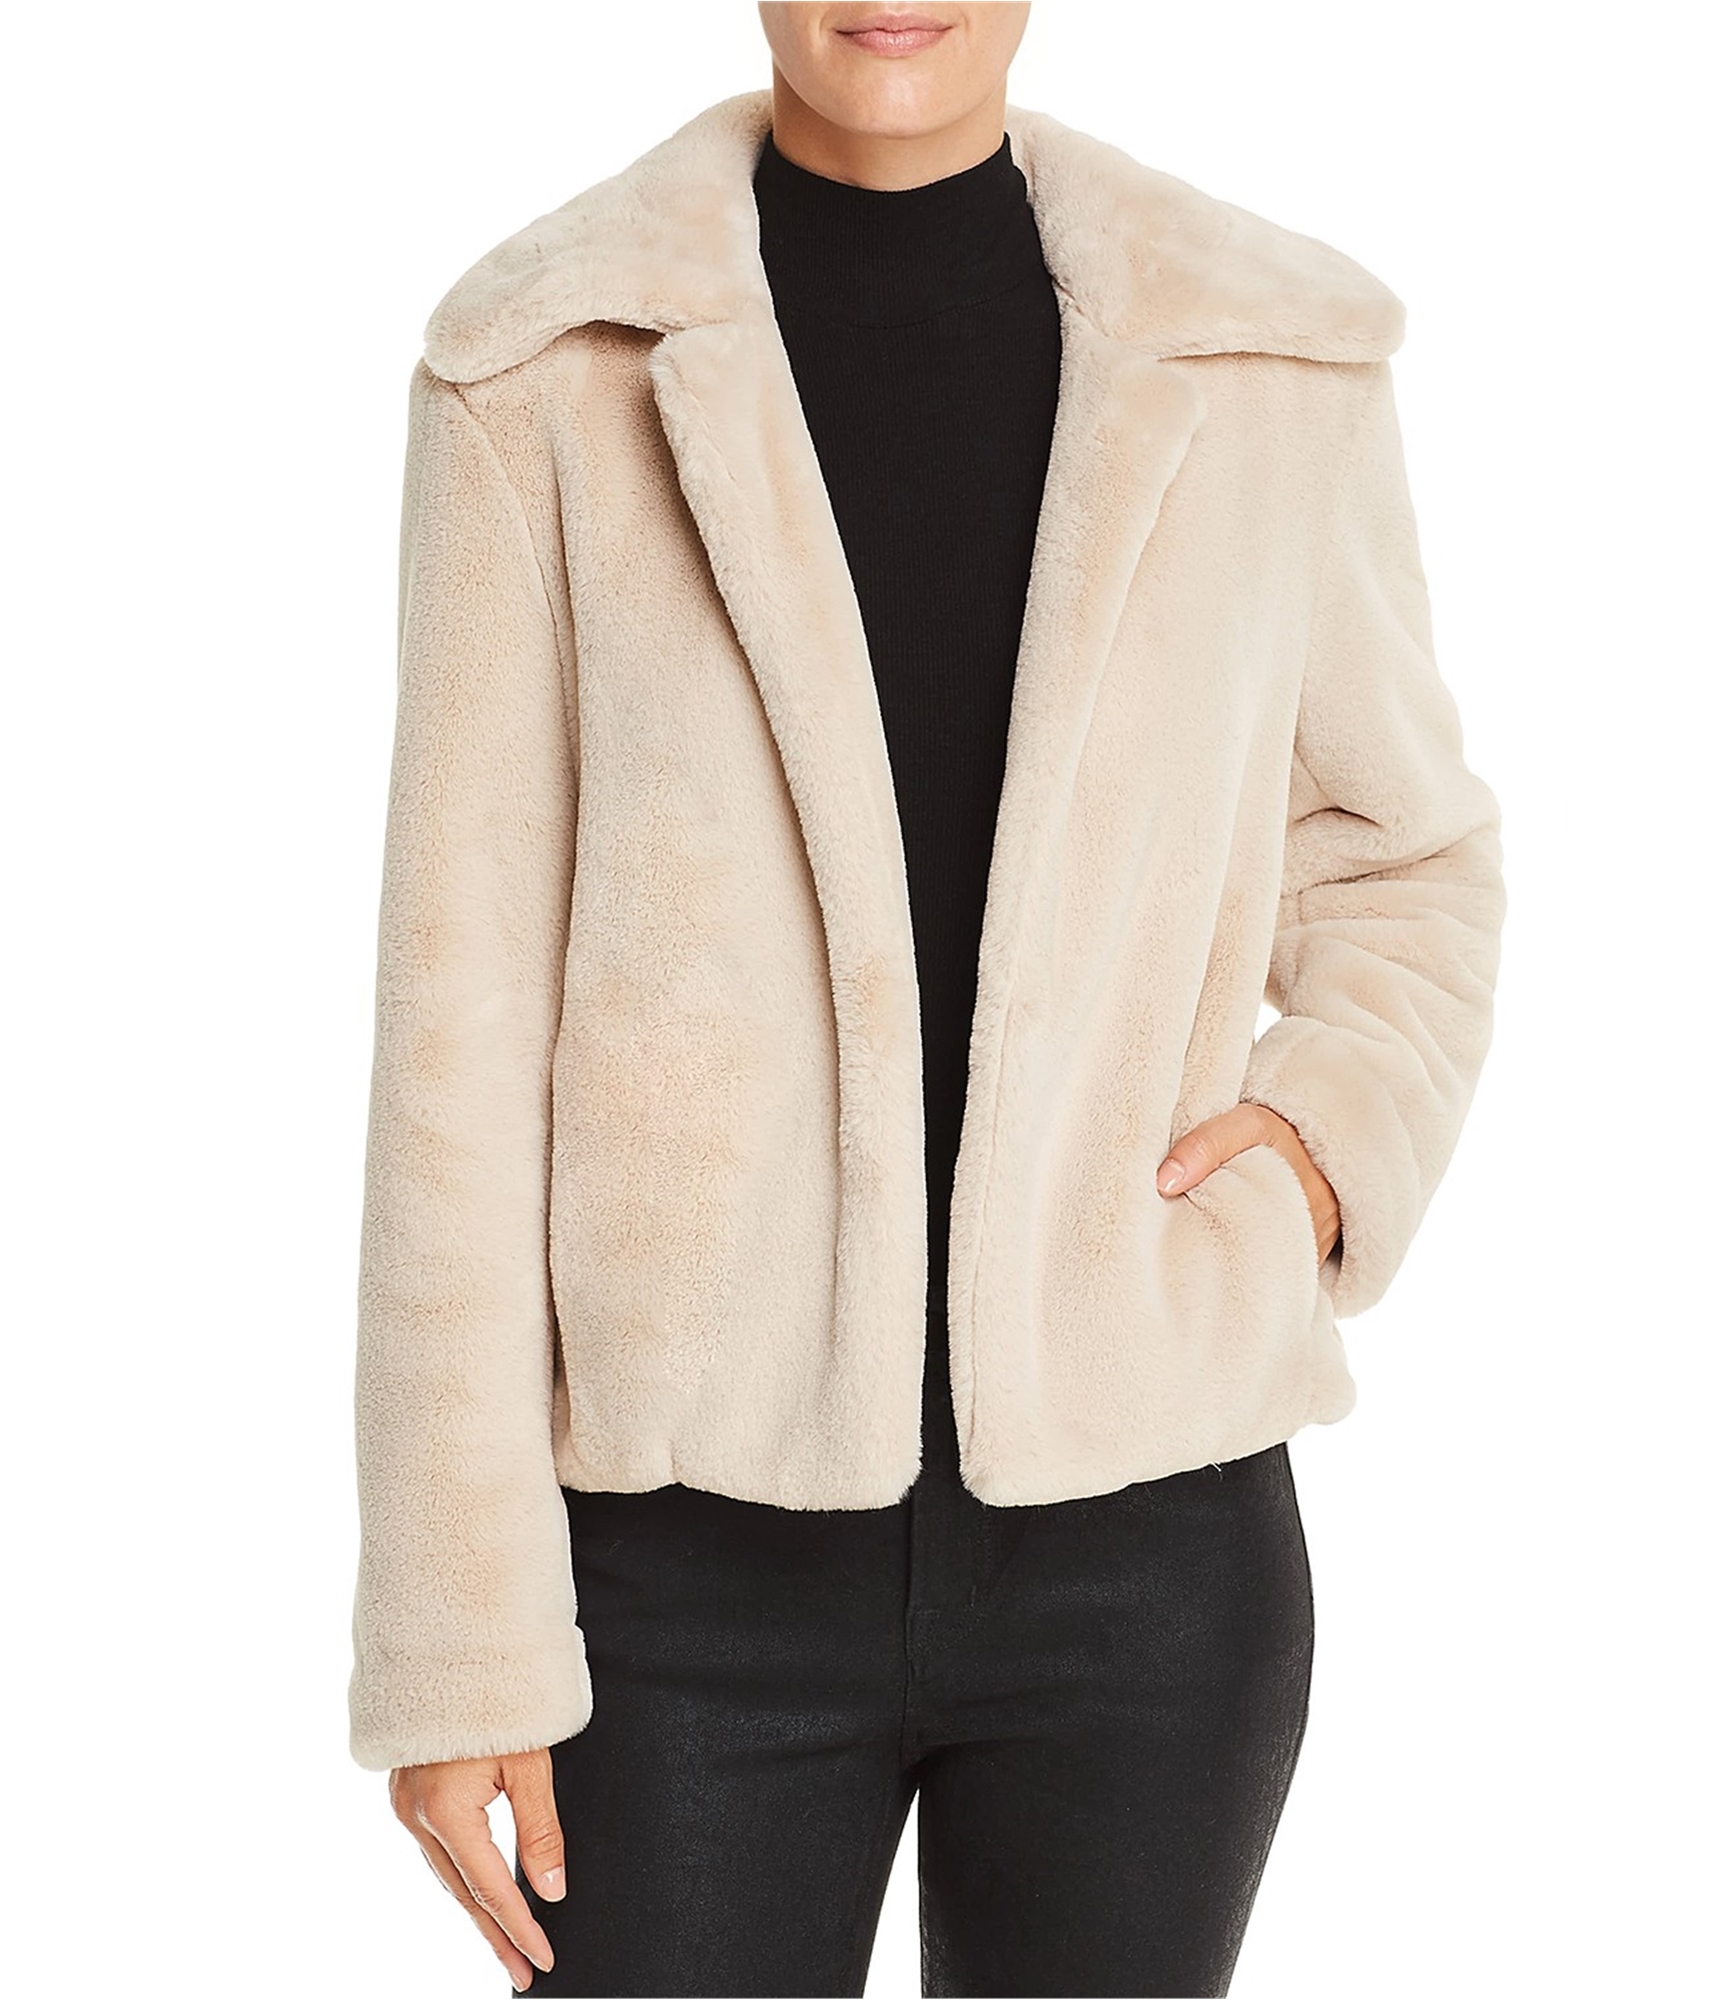 Buy a Theory Womens Luxe Faux Fur Jacket | Tagsweekly